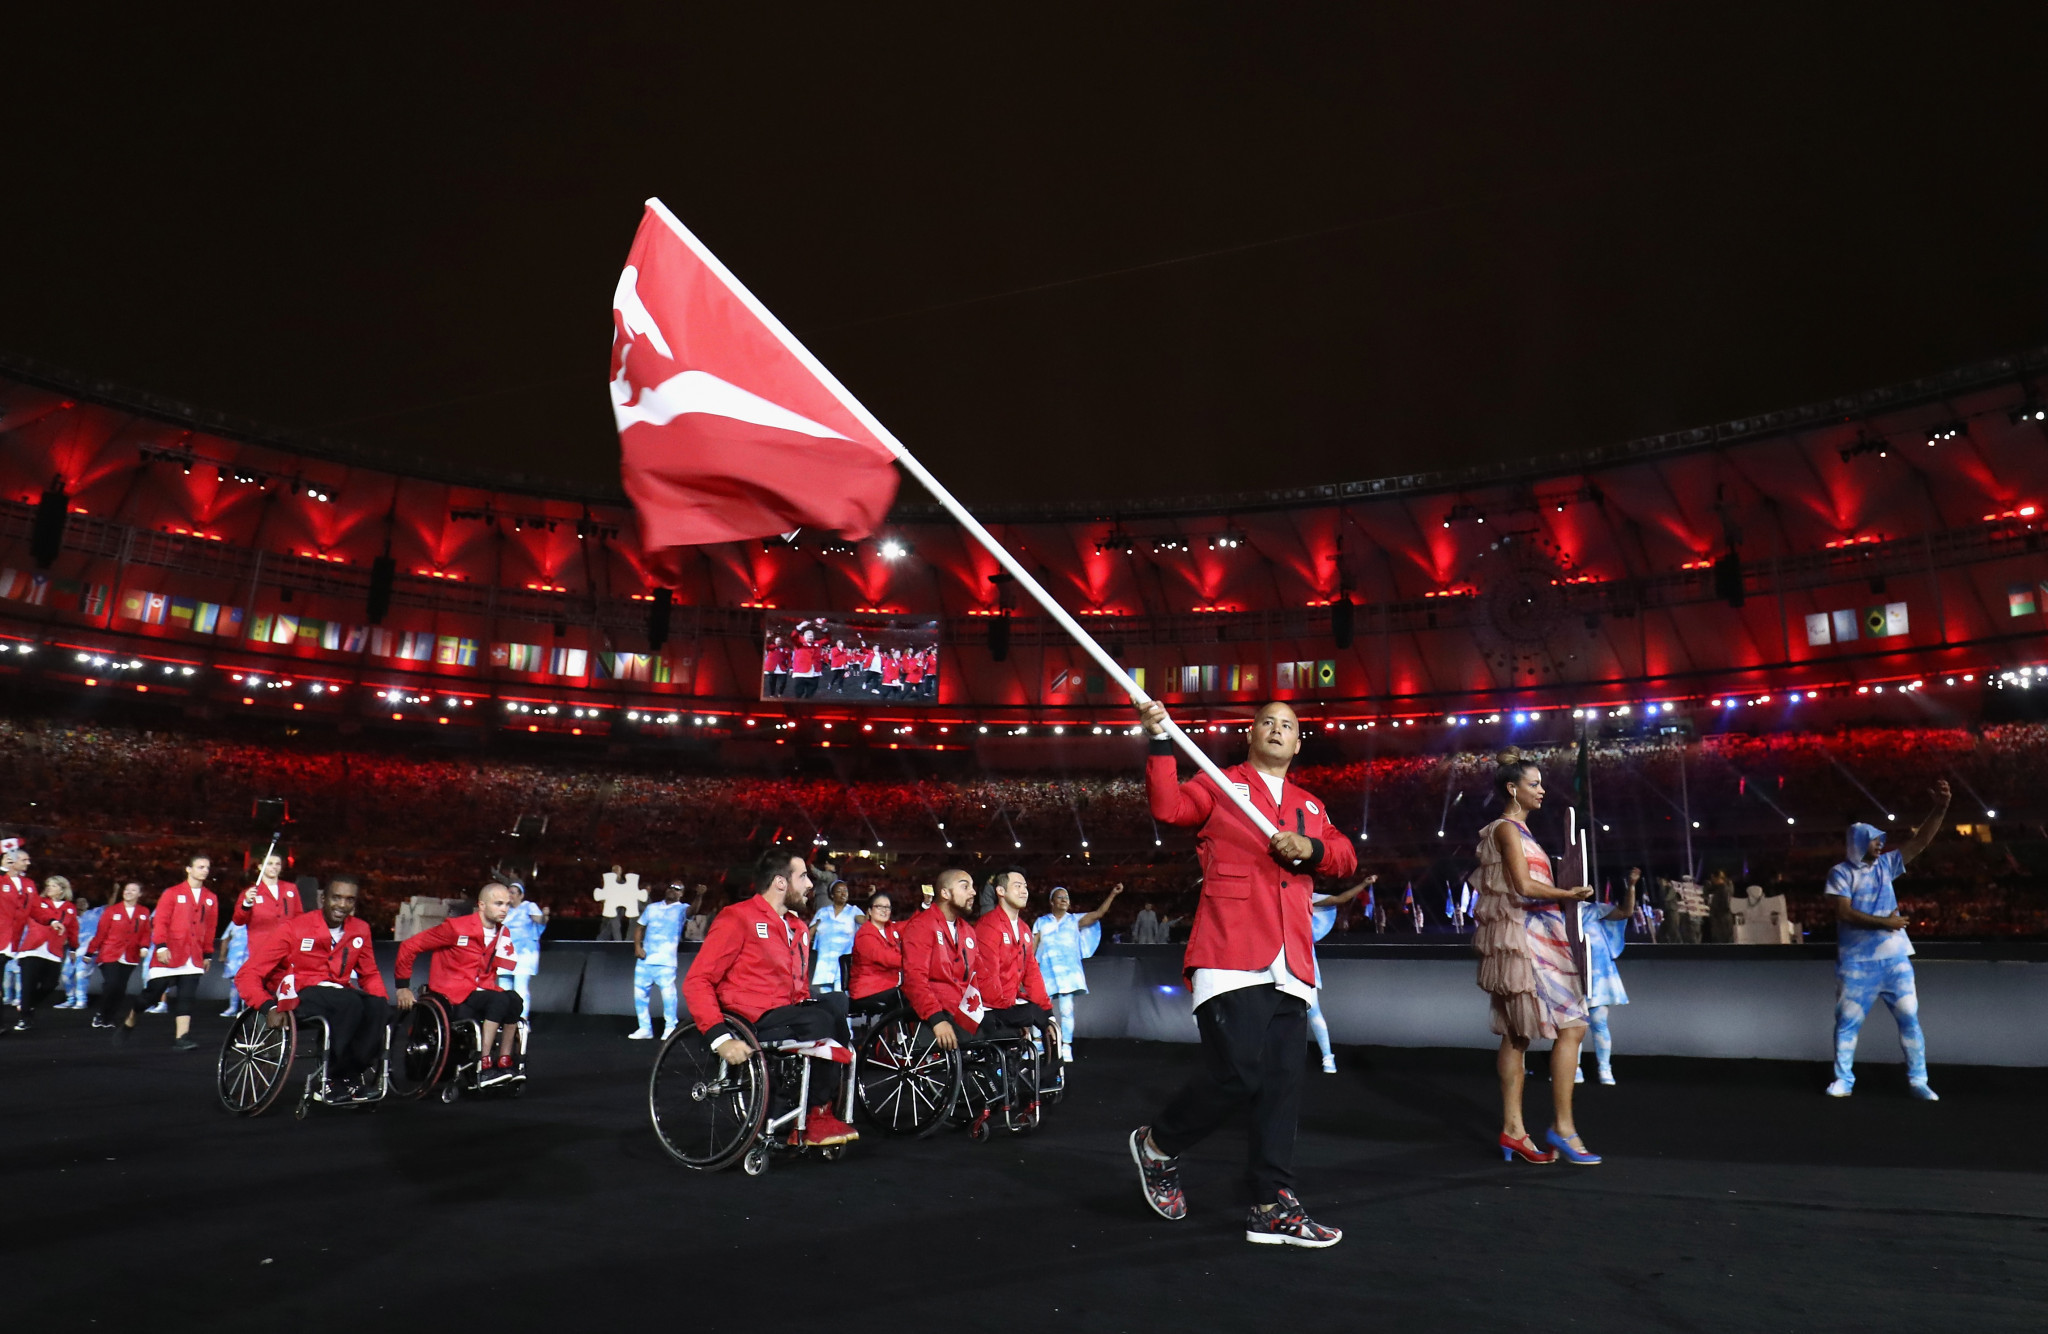 David Eng, Canada's Flagbearer at the Rio 2016 Paralympics, has already been ruled ineligible as part of the reassessment process ©Getty Images